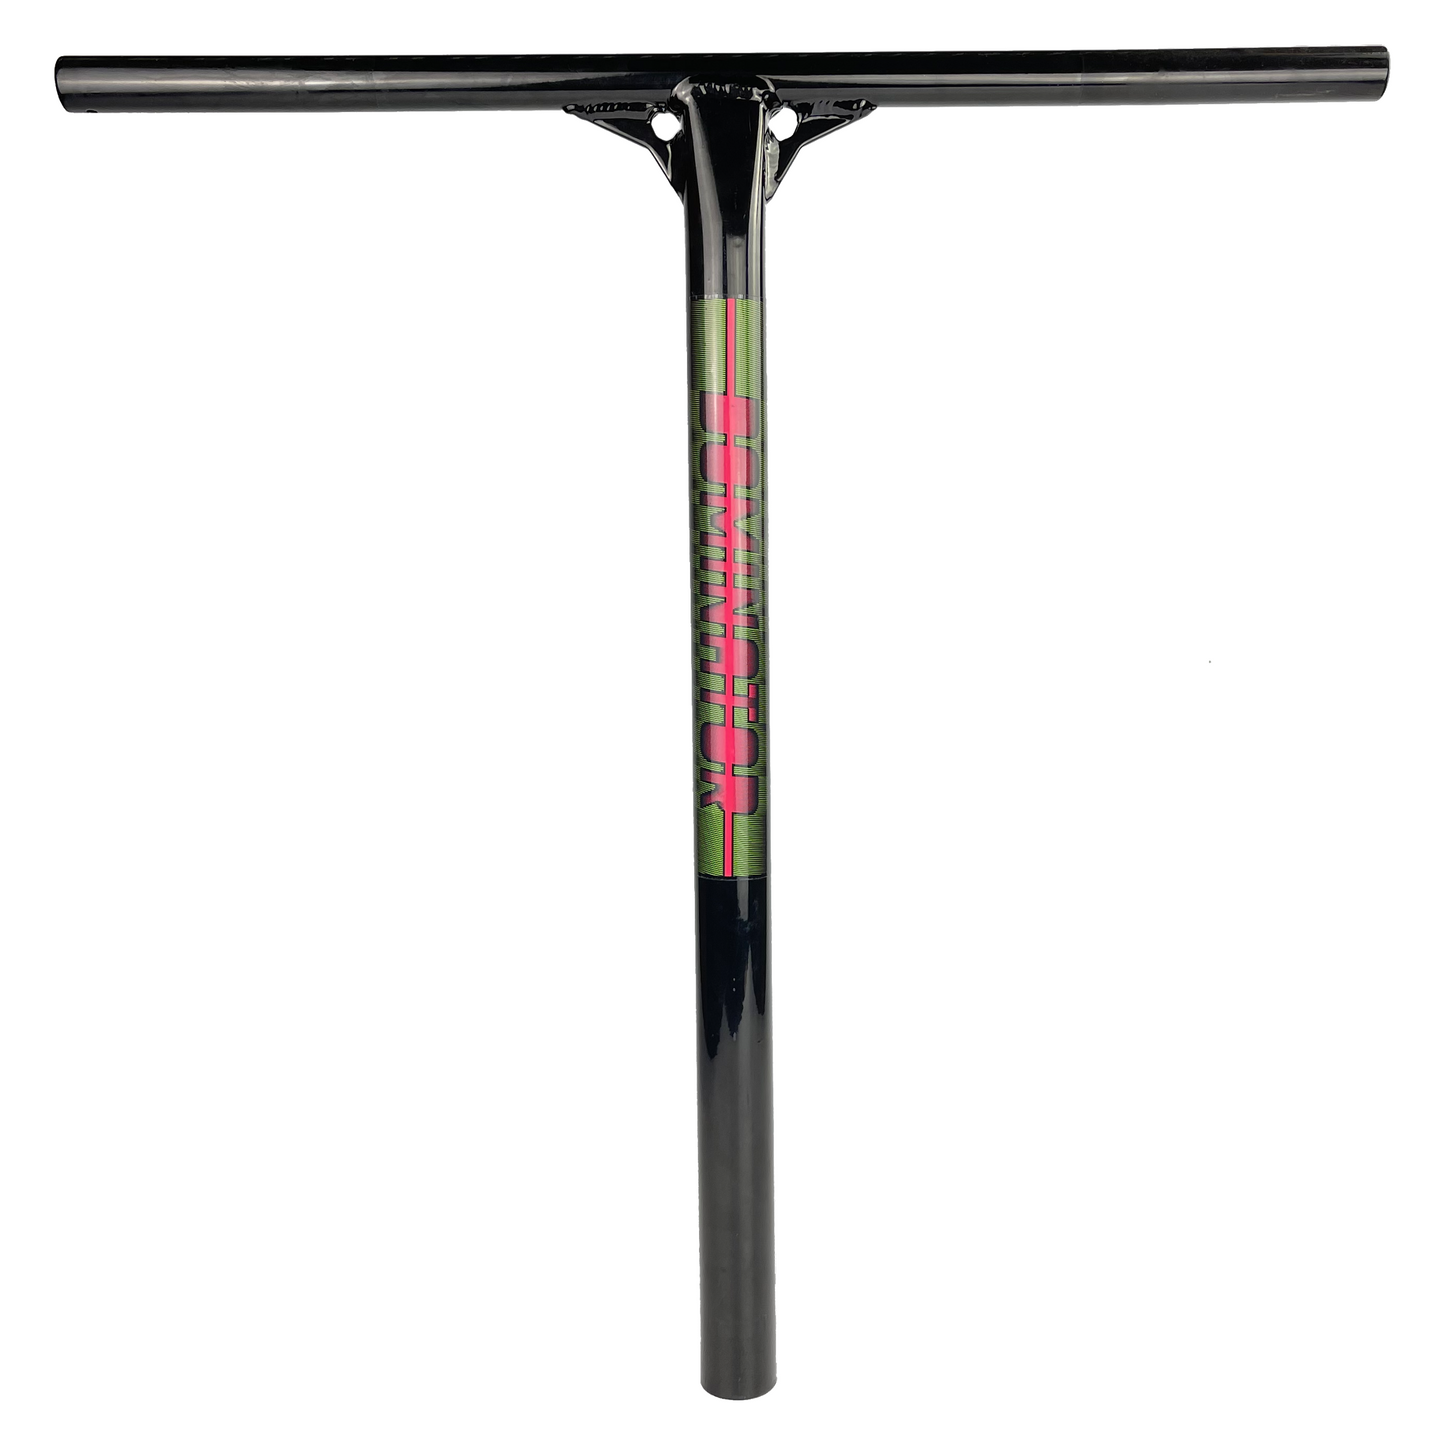 Dominator Scooters Team Edition Alloy Bar 600mm x 600mm - Black